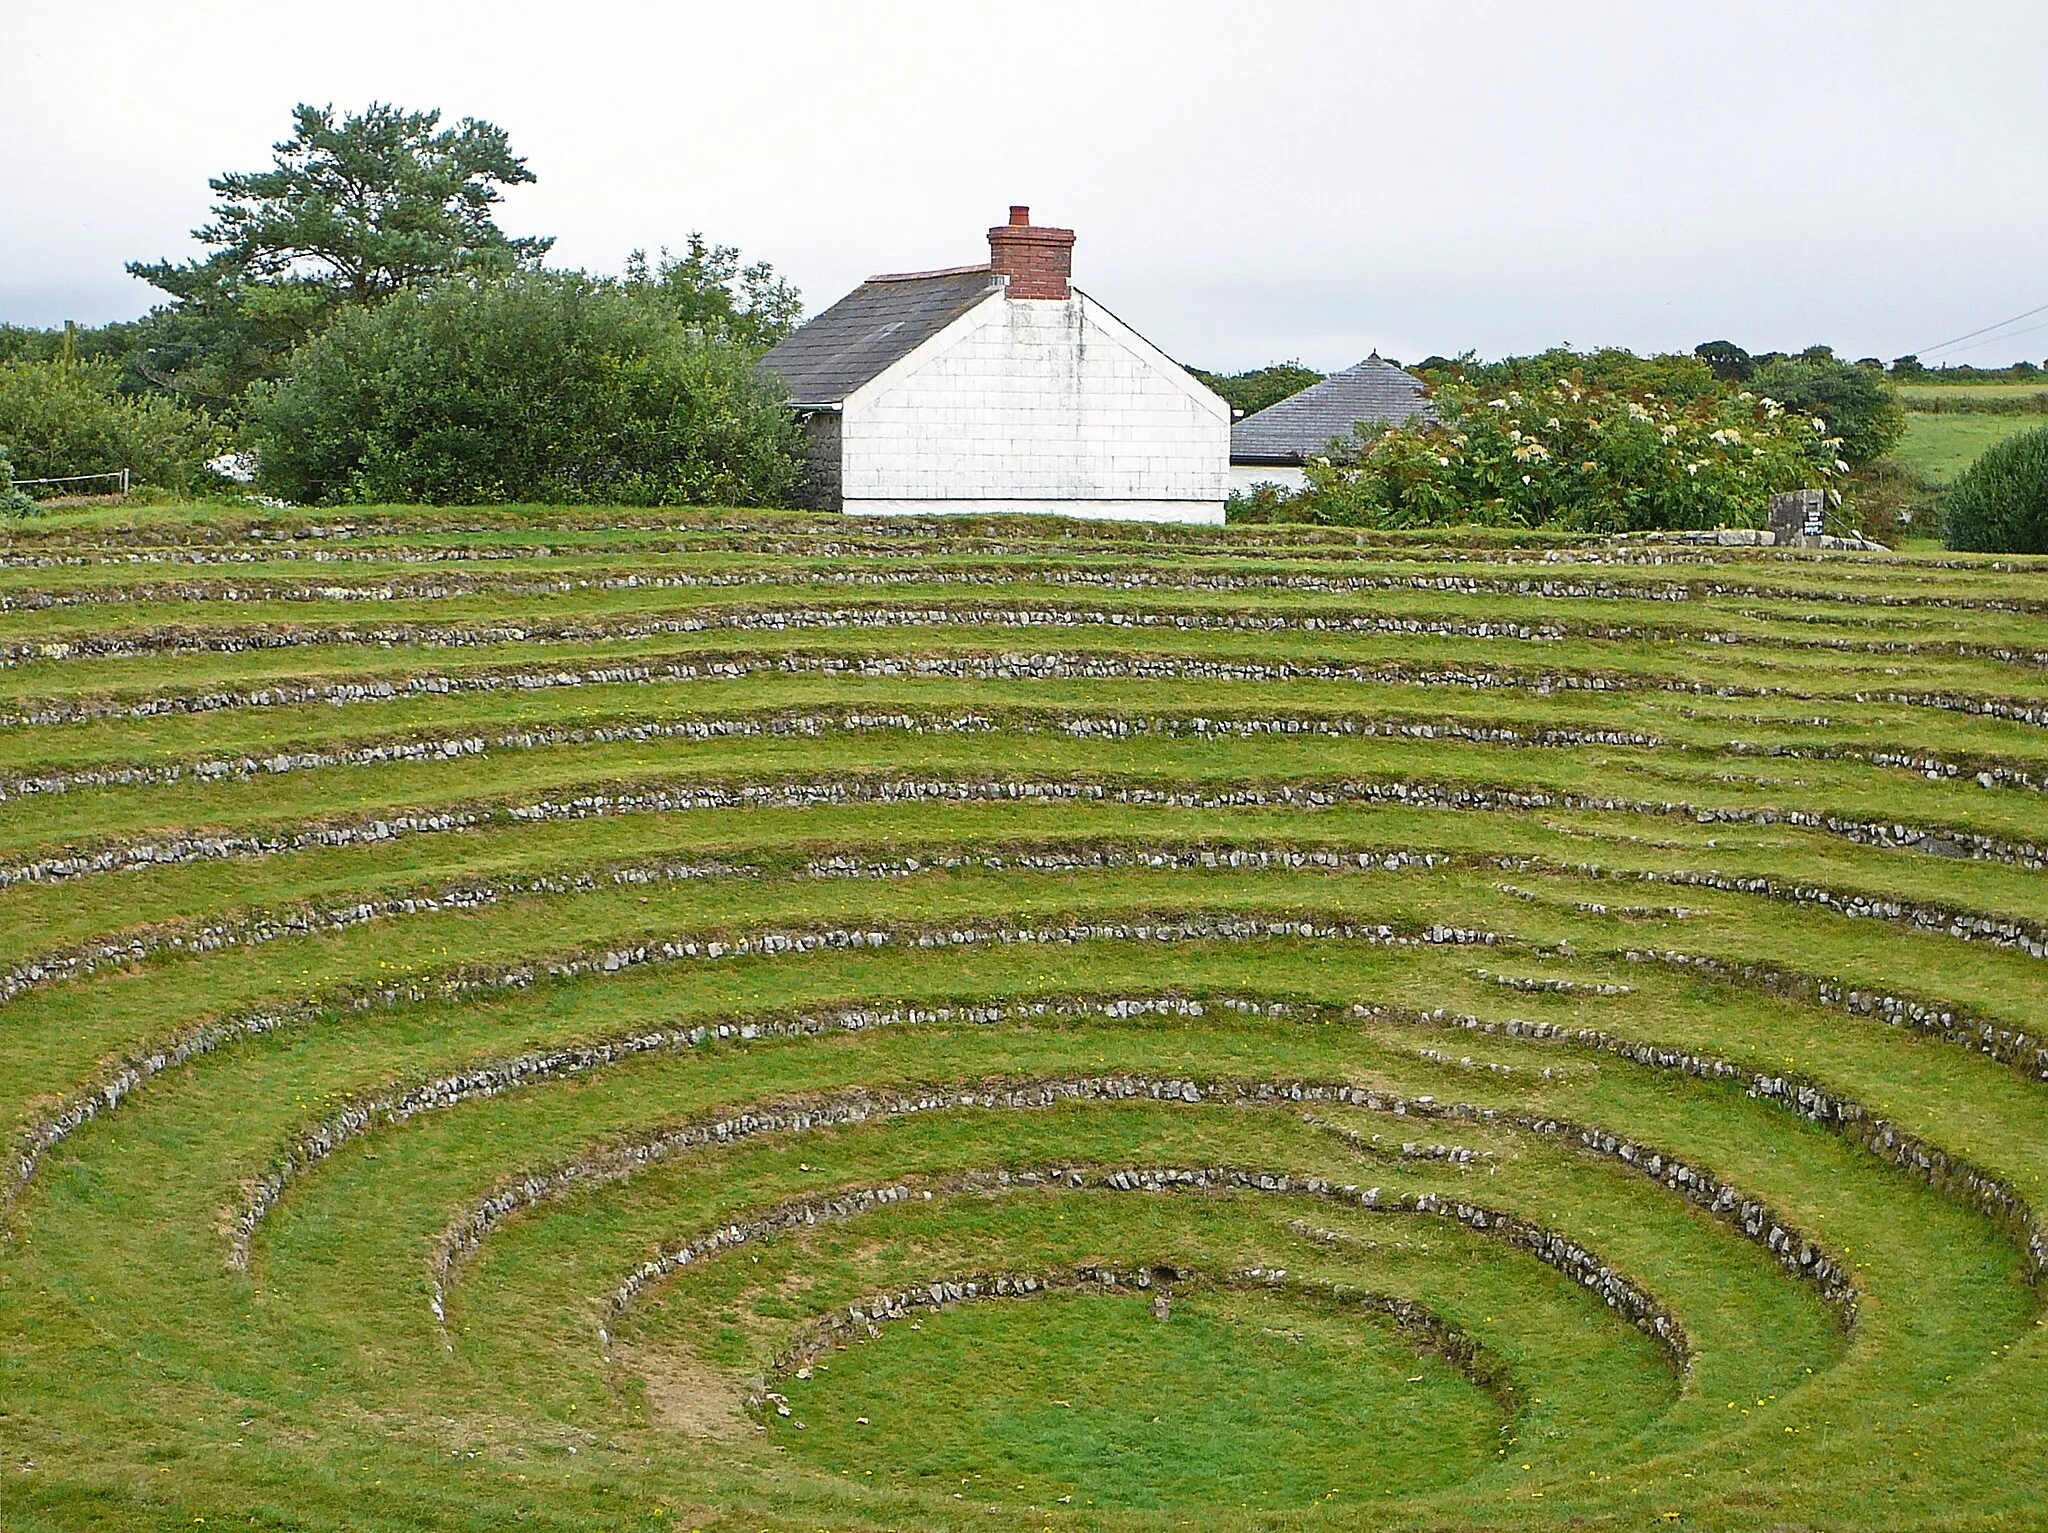 Photo showing: Methodist open air meeting place. 1762, remodelled in 1806. Conical pit made in fallen-in mine shaft which was used by John Wesley for preaching in 1762, and remodelled and reduced in size in 1806, to 360 feet circumference and 16 feet depth, with 13 circles of tufted seating faced with random rubble. On the west side a flight of segmental steps is built into the terraces, and to the north round the 4th step down is a pair of stone posts with a rectangular boulder between them (probably the "pulpit"). Used for Whit Monday services annually from 1807 to 1966.